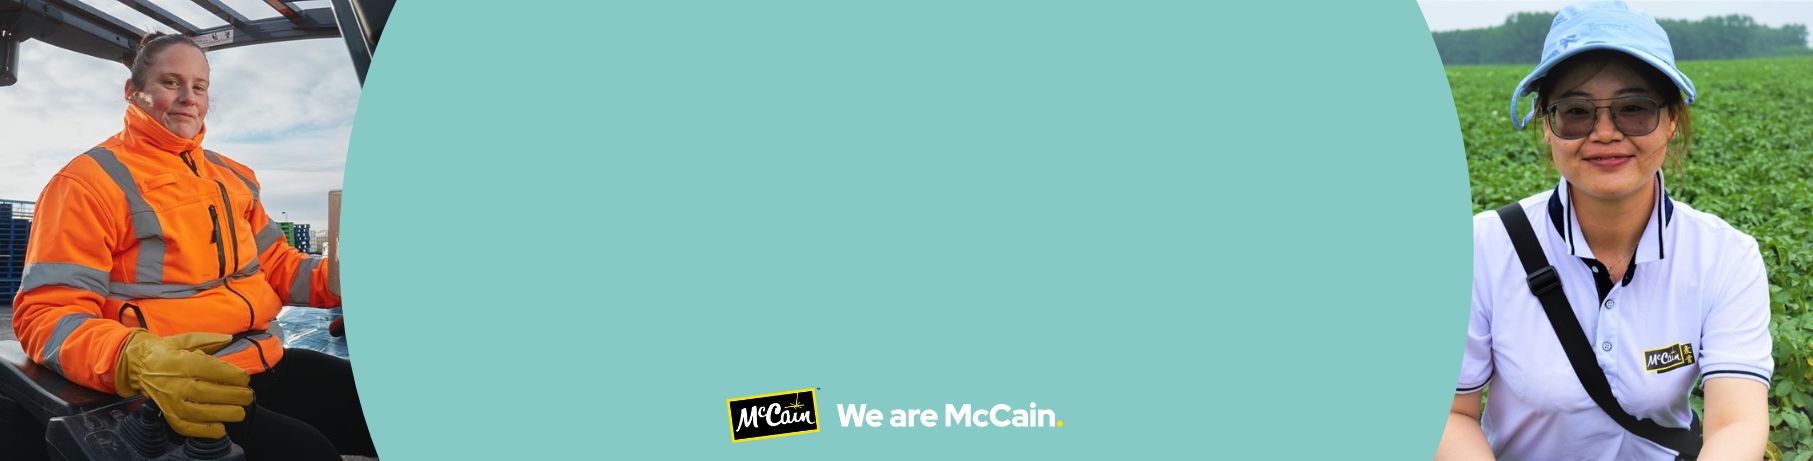 McCain team members - in factory and farming environments